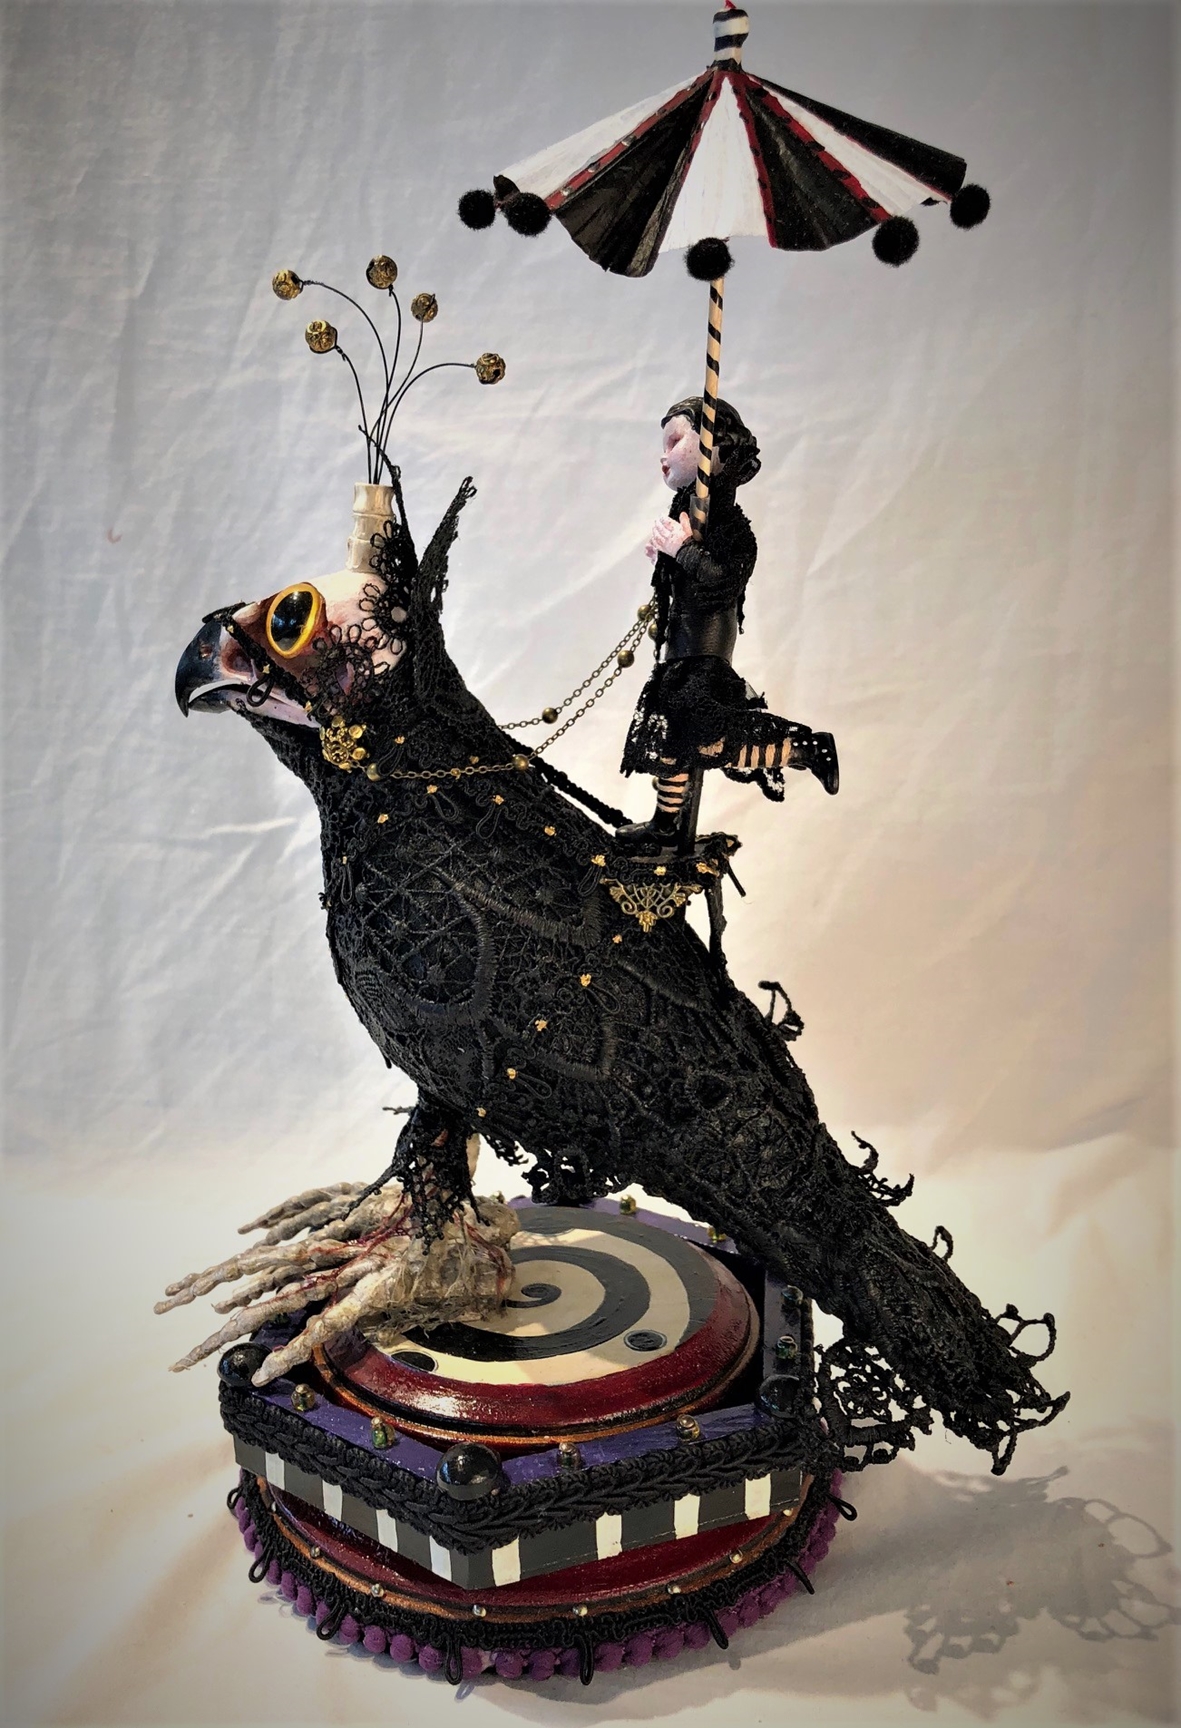 mixed media miniature gothic circus performer carrying a parasol rides a black lace-covered undead crow standing on painted wooden platform